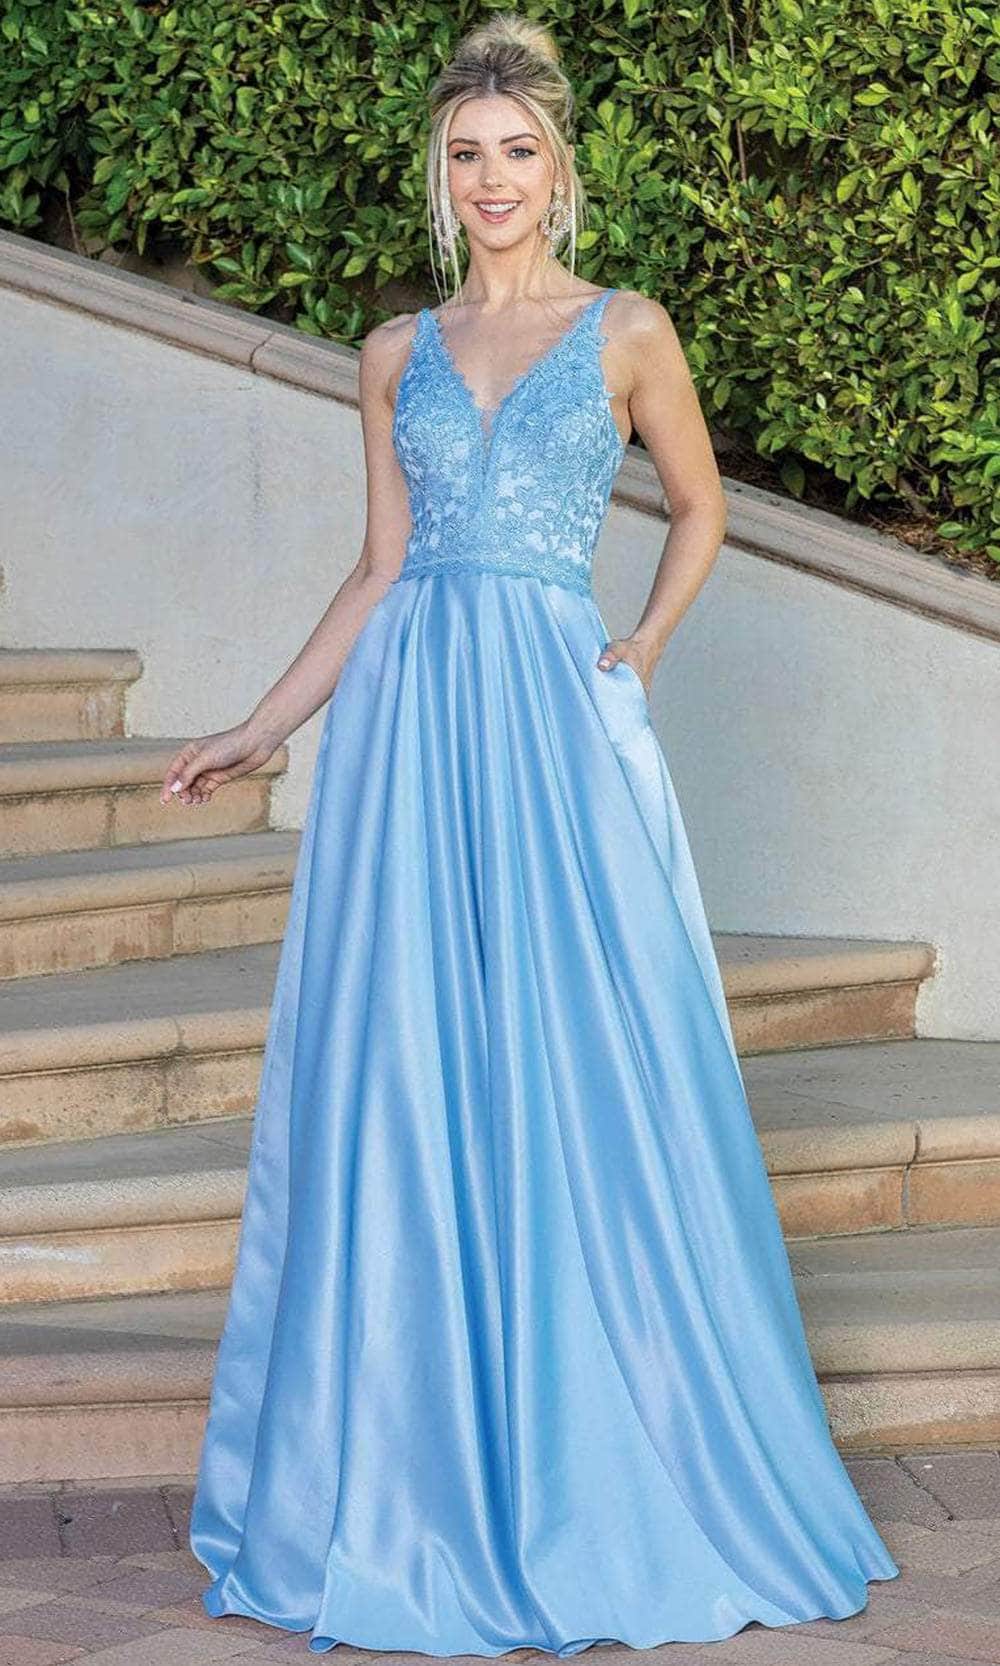 Dancing Queen 4260 - Embroidered Sleeveless V-neck Prom Dress Special Occasion Dress XS / Bahama Blue